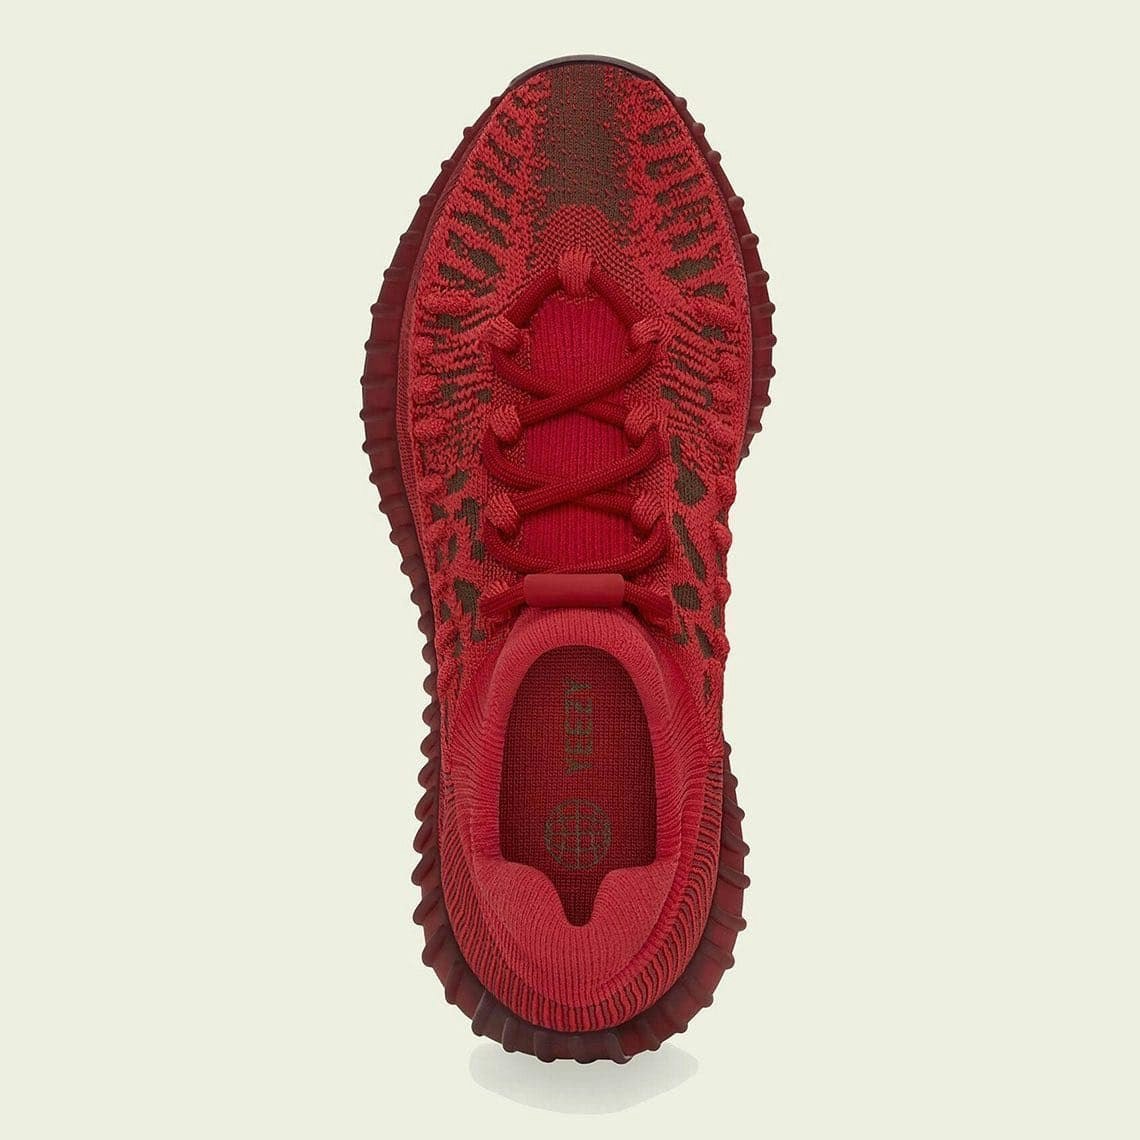 adidas Yeezy Boost 350 V2 CMPCT "Slate Red"